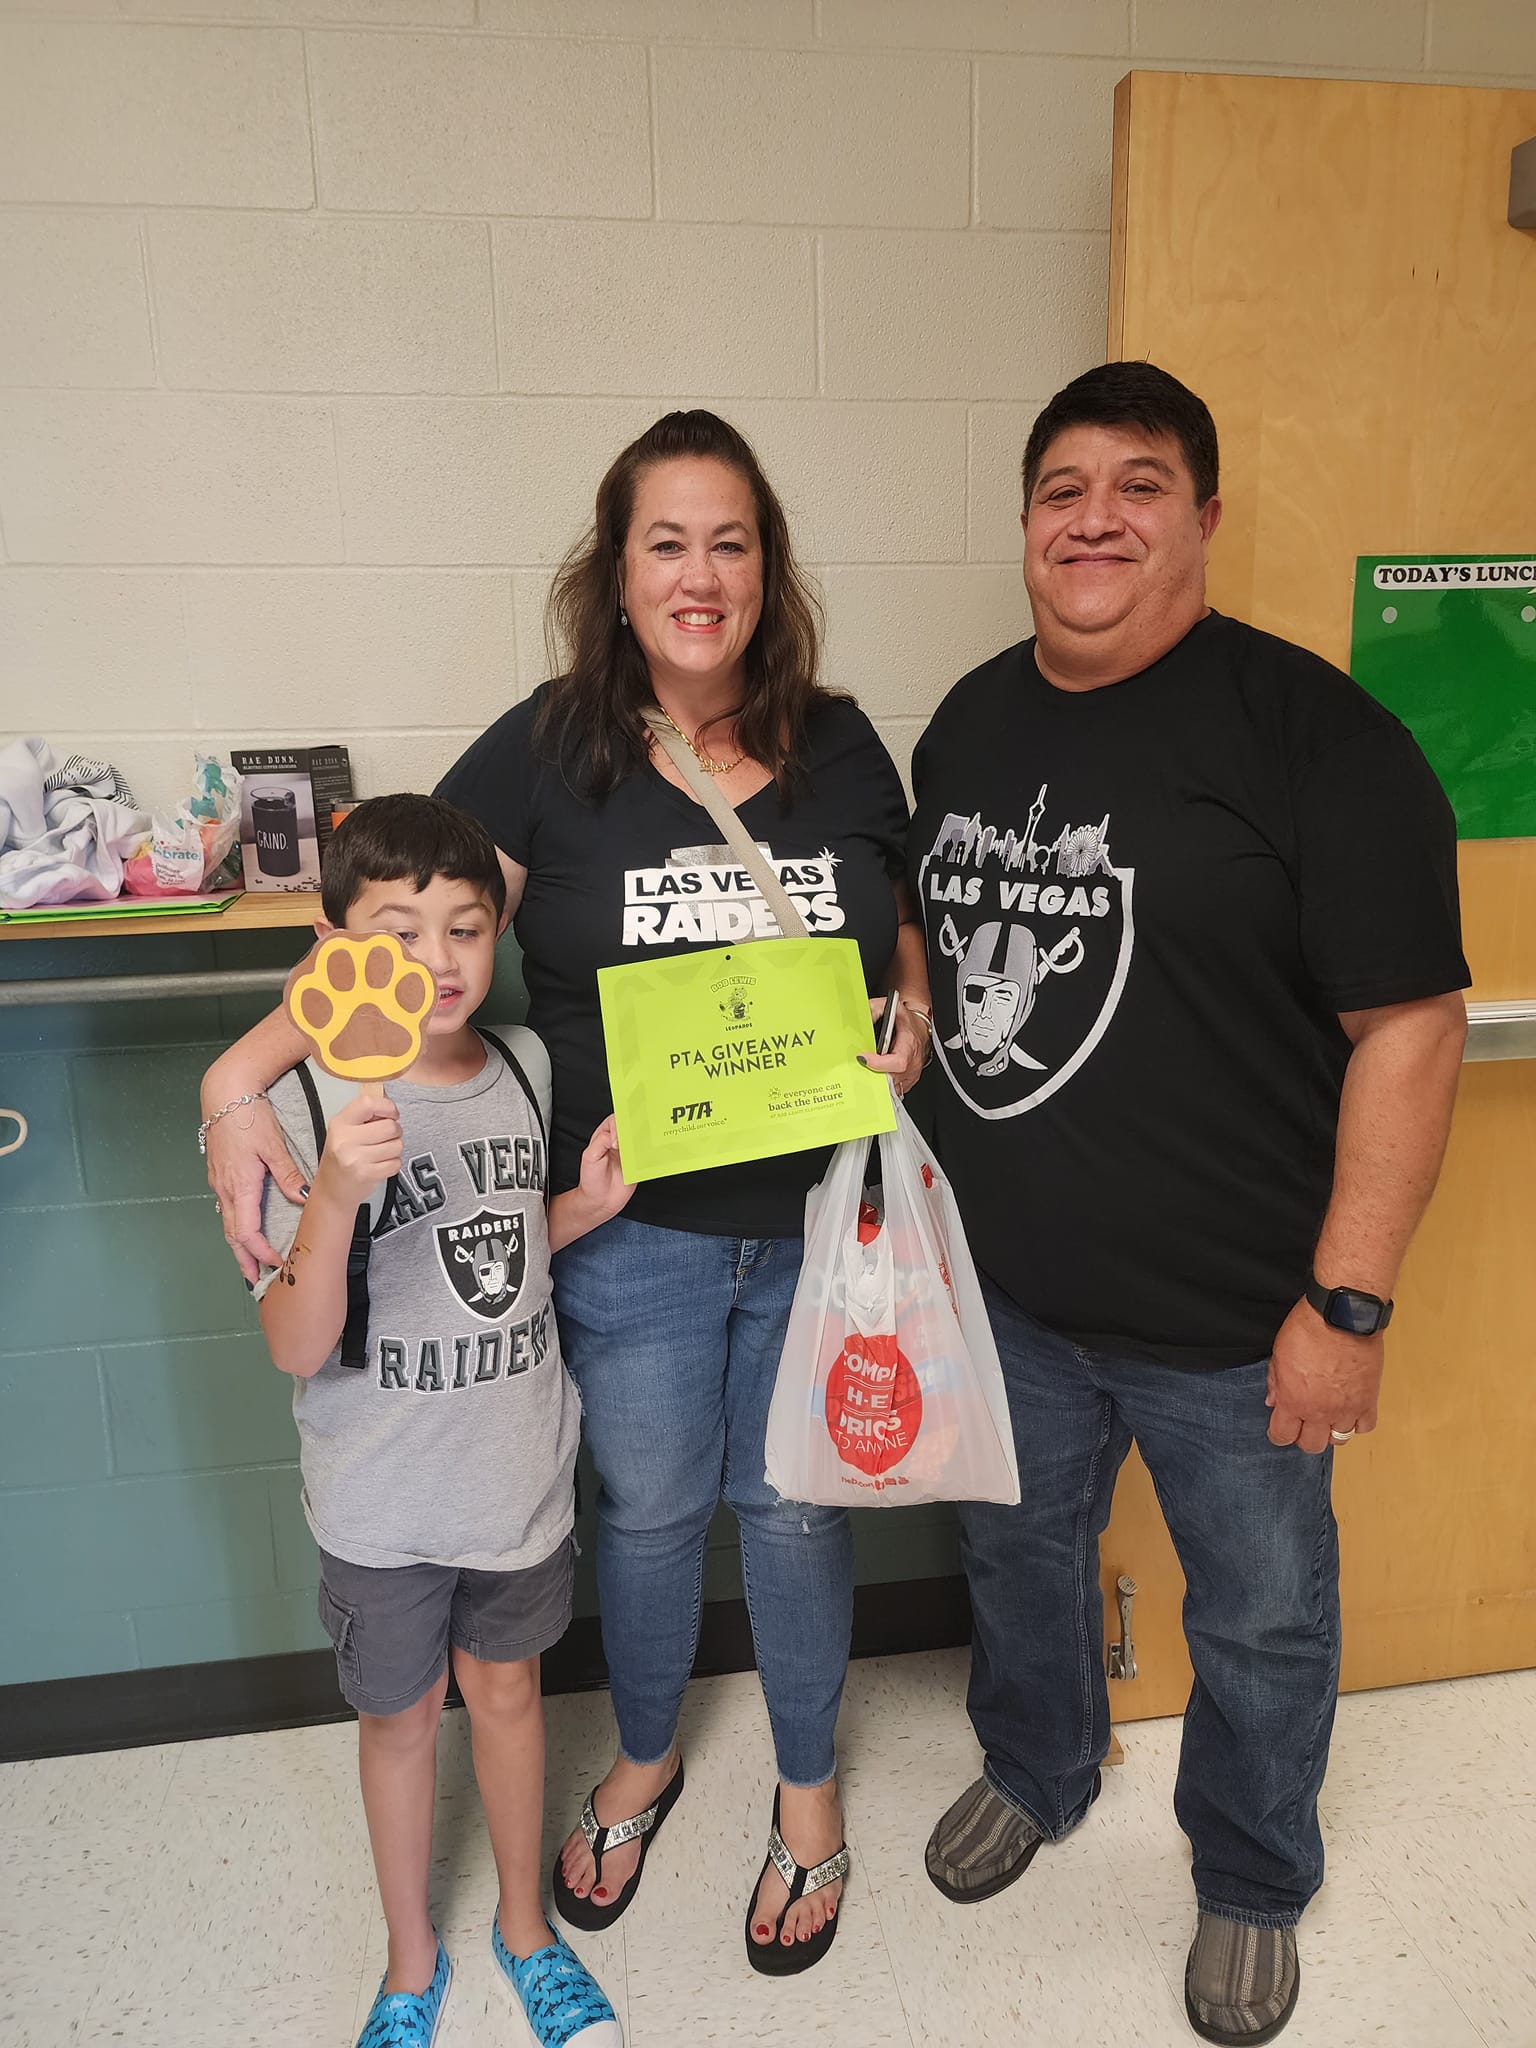 A dad, mom and child winning one of the PTA giveaways.